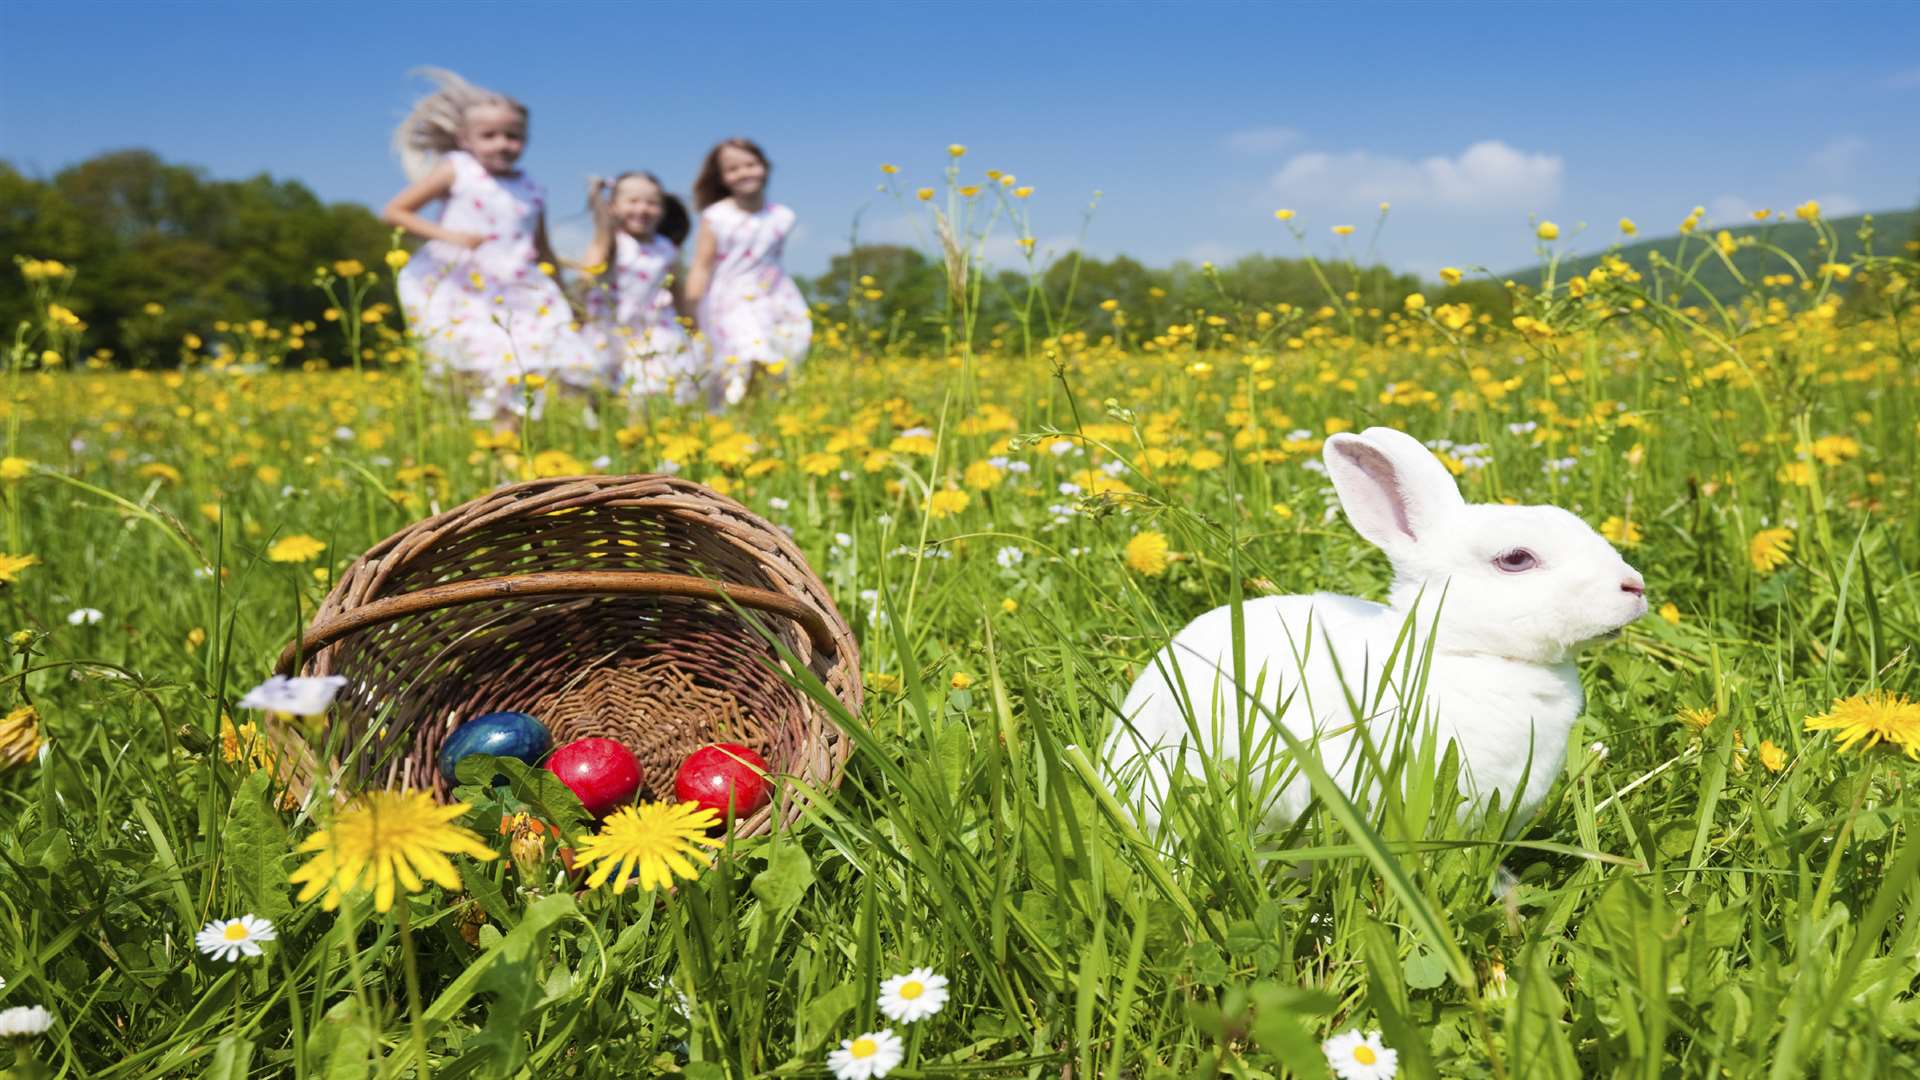 Catch up with the Easter bunny at one of the many events taking place all across Kent